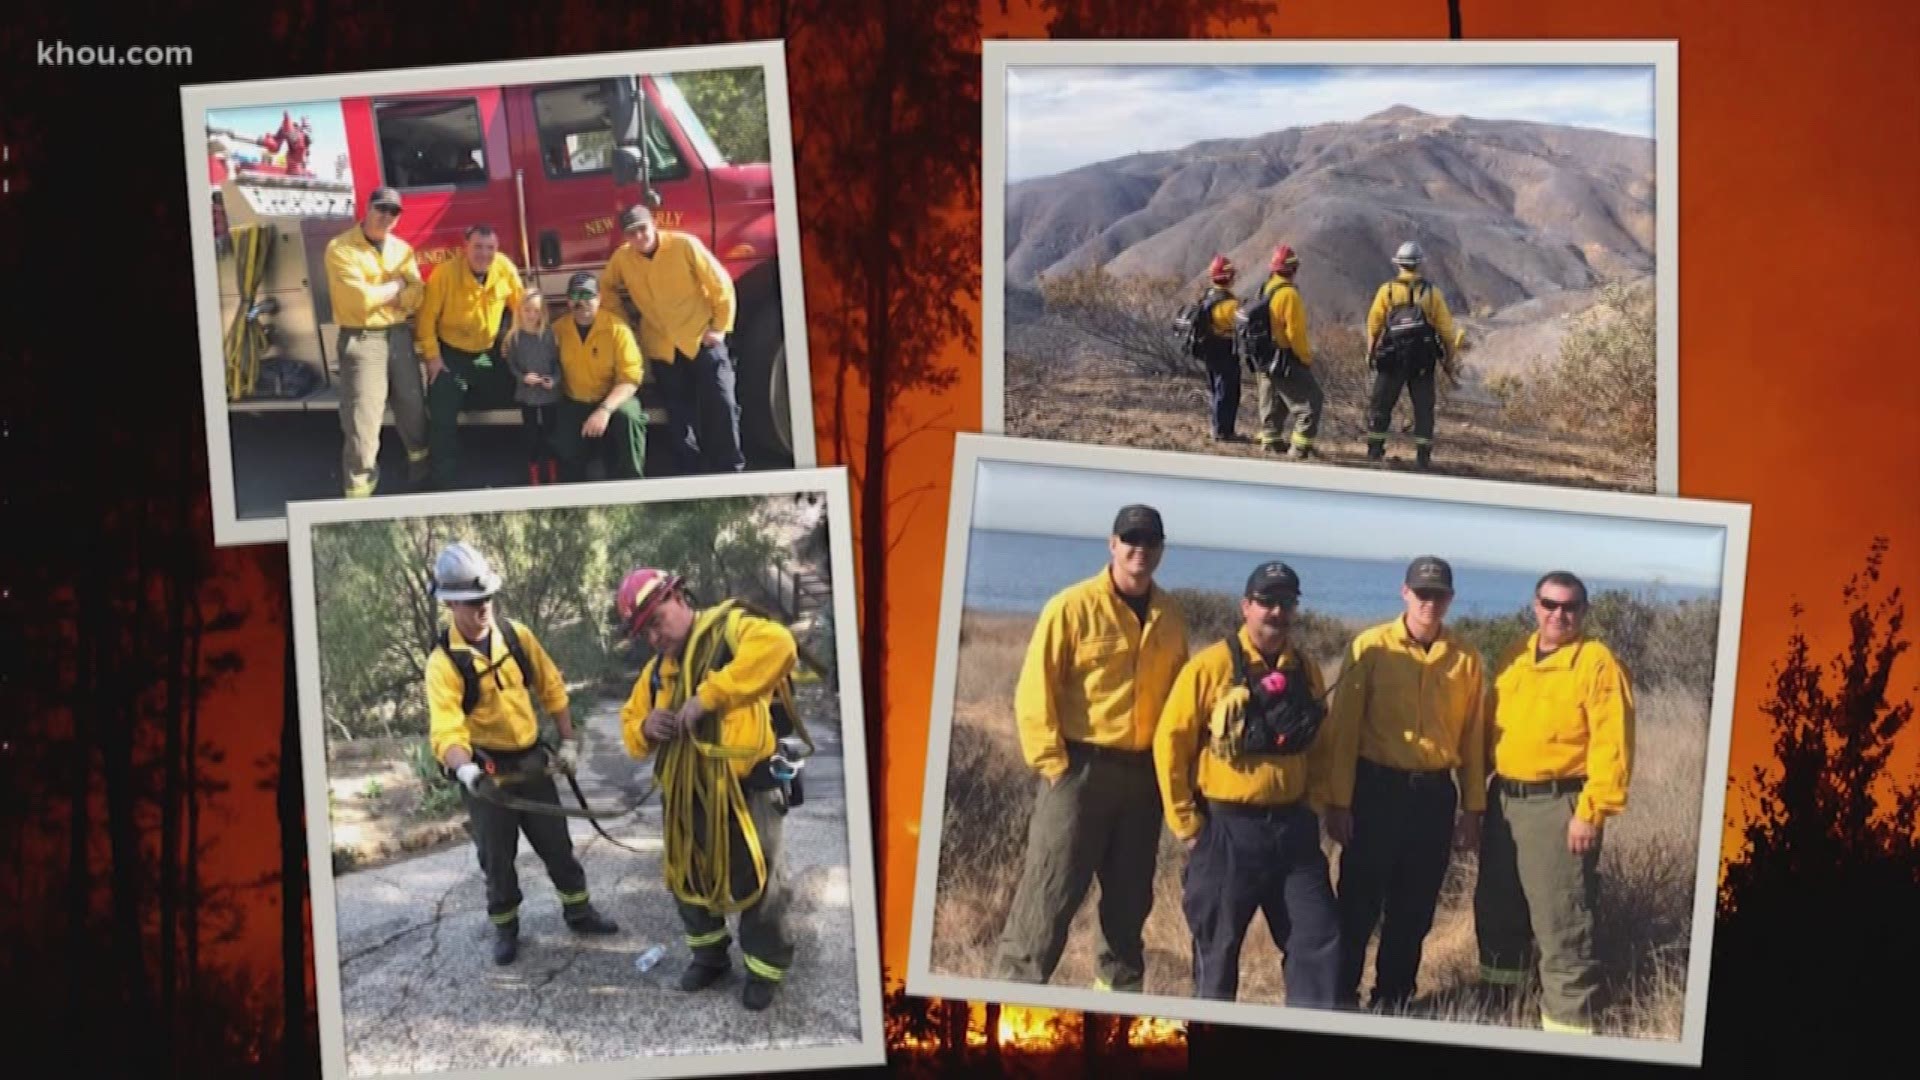 Firefighters from New Waverly who traveled to California to help put out the wildfires are on their way home.